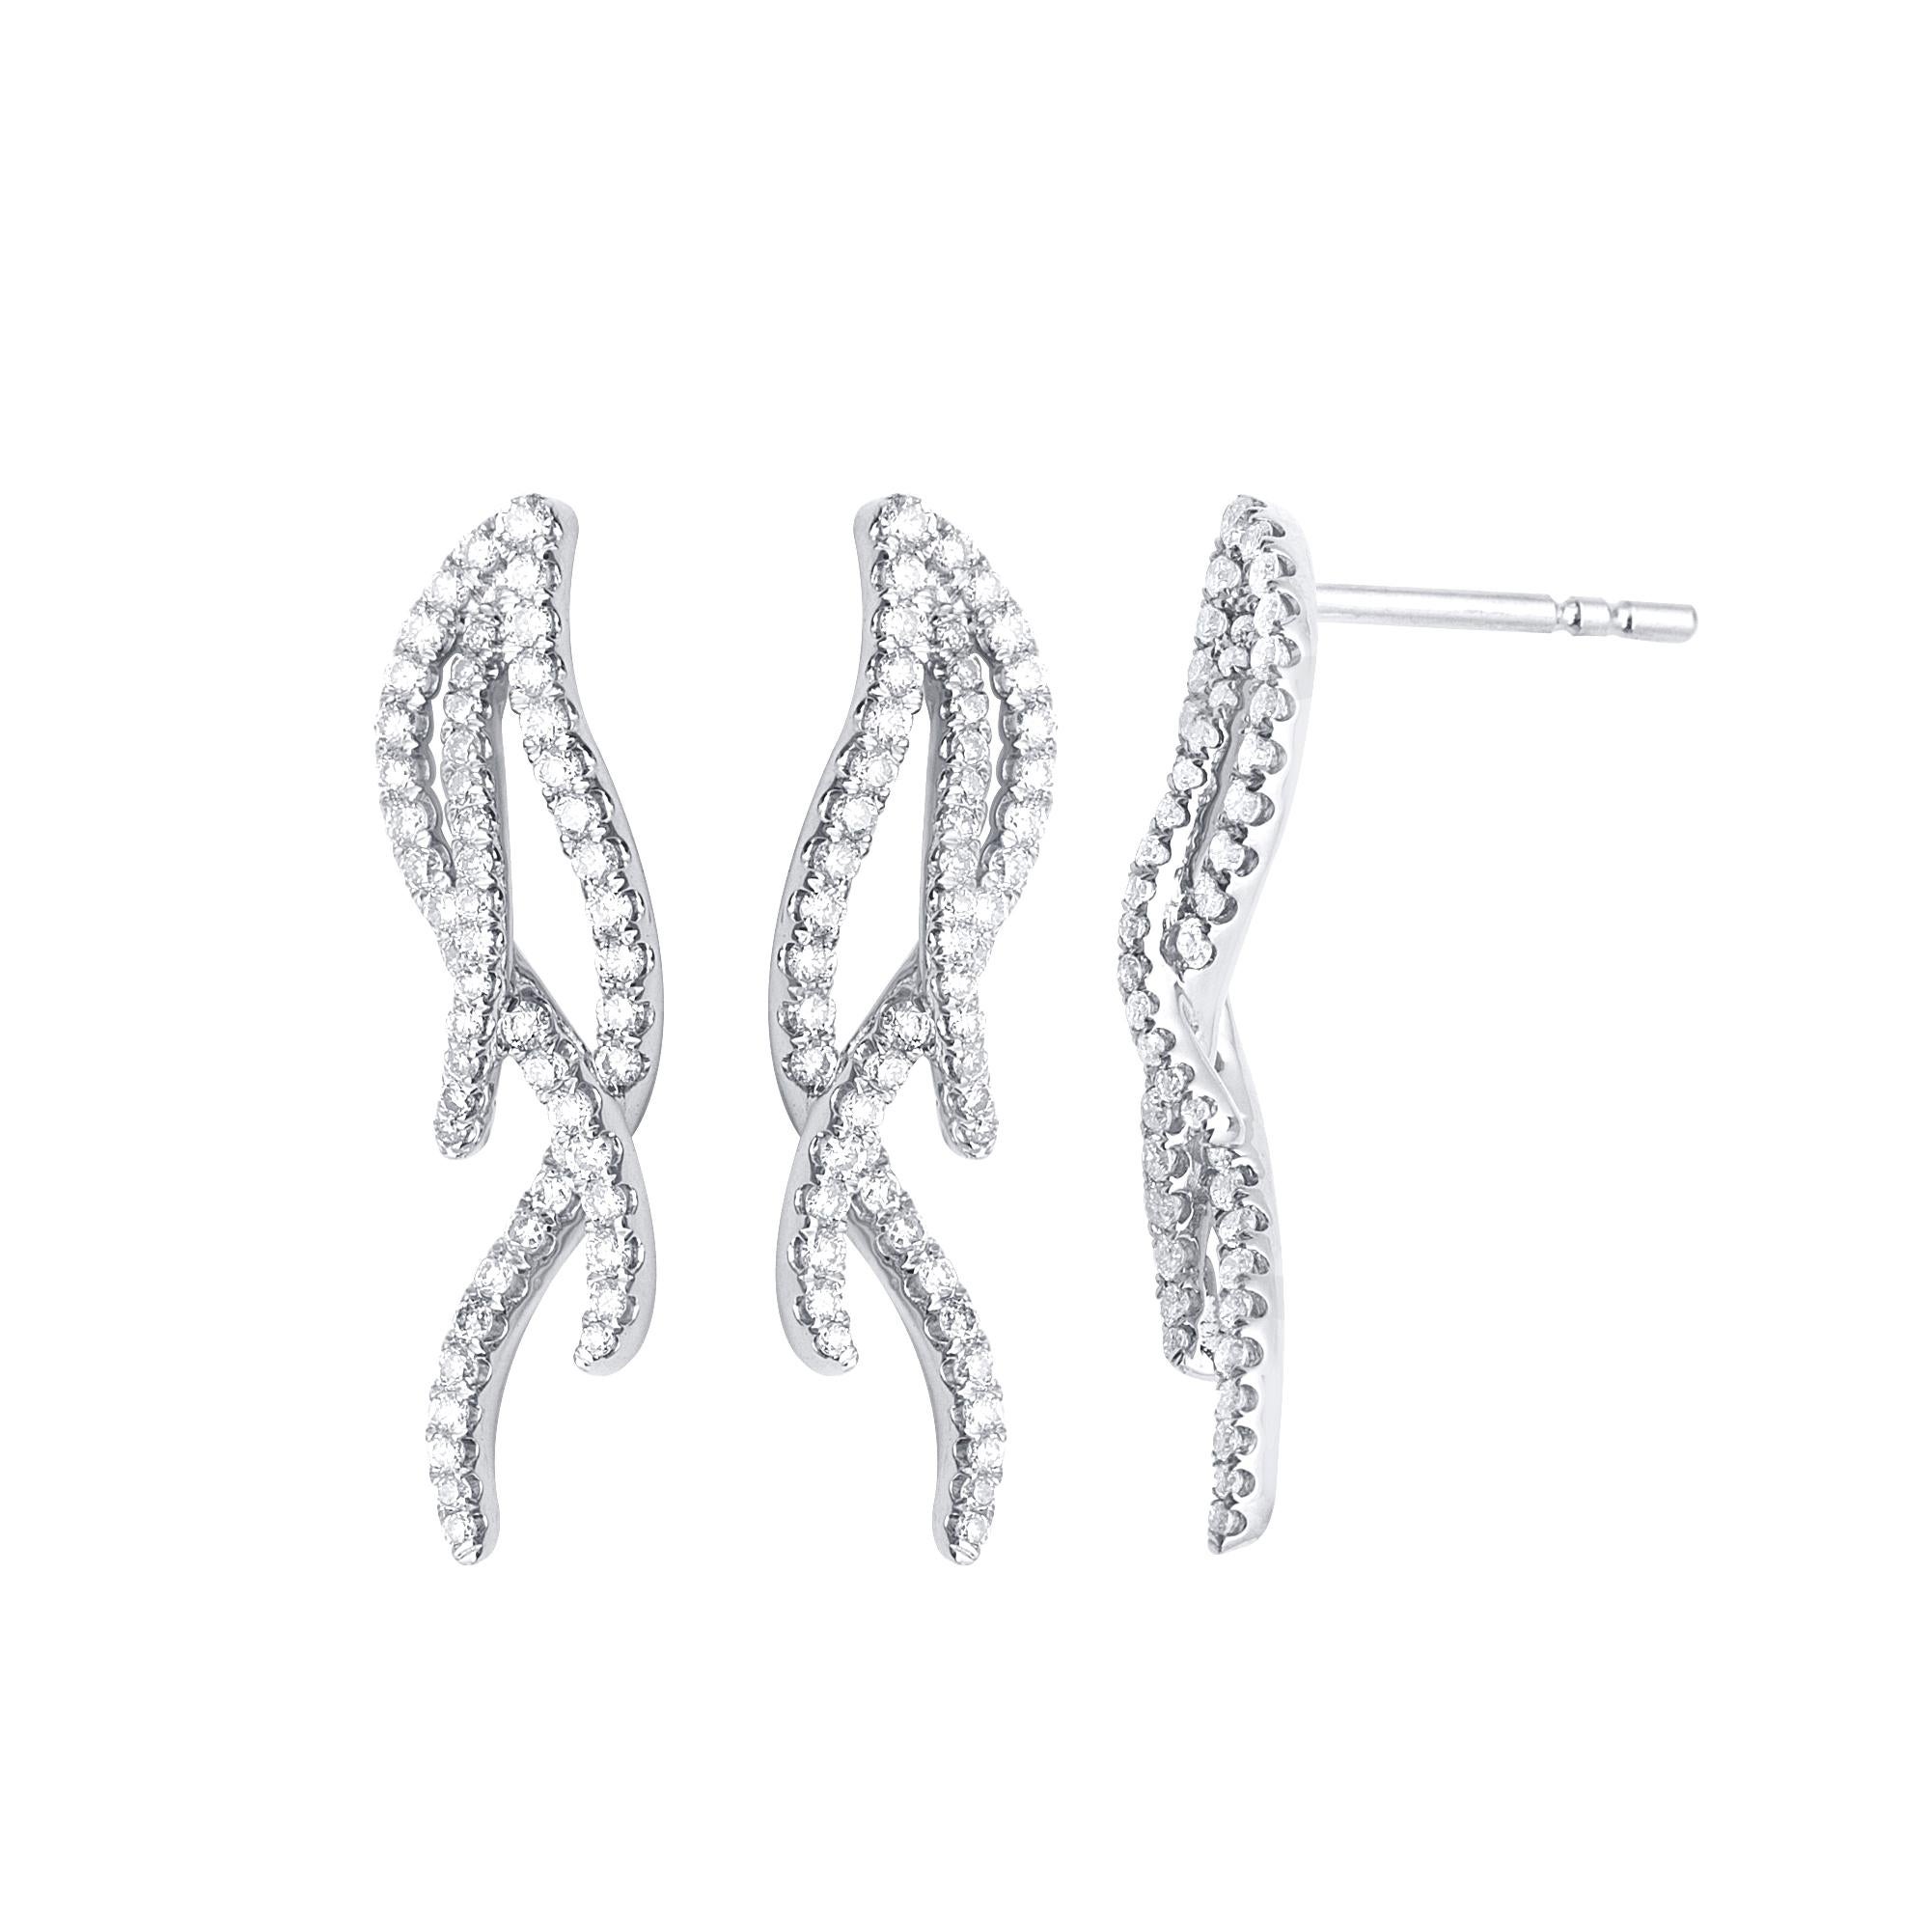 18 Karat White Gold And Diamond Earring

Diamonds of approximately 0.578 carats, mounted on 18 karat white gold earring. The earring weighs approximately around 2.272 grams.

Please note: The charges specified do not include any shipment, VAT, DUTY,